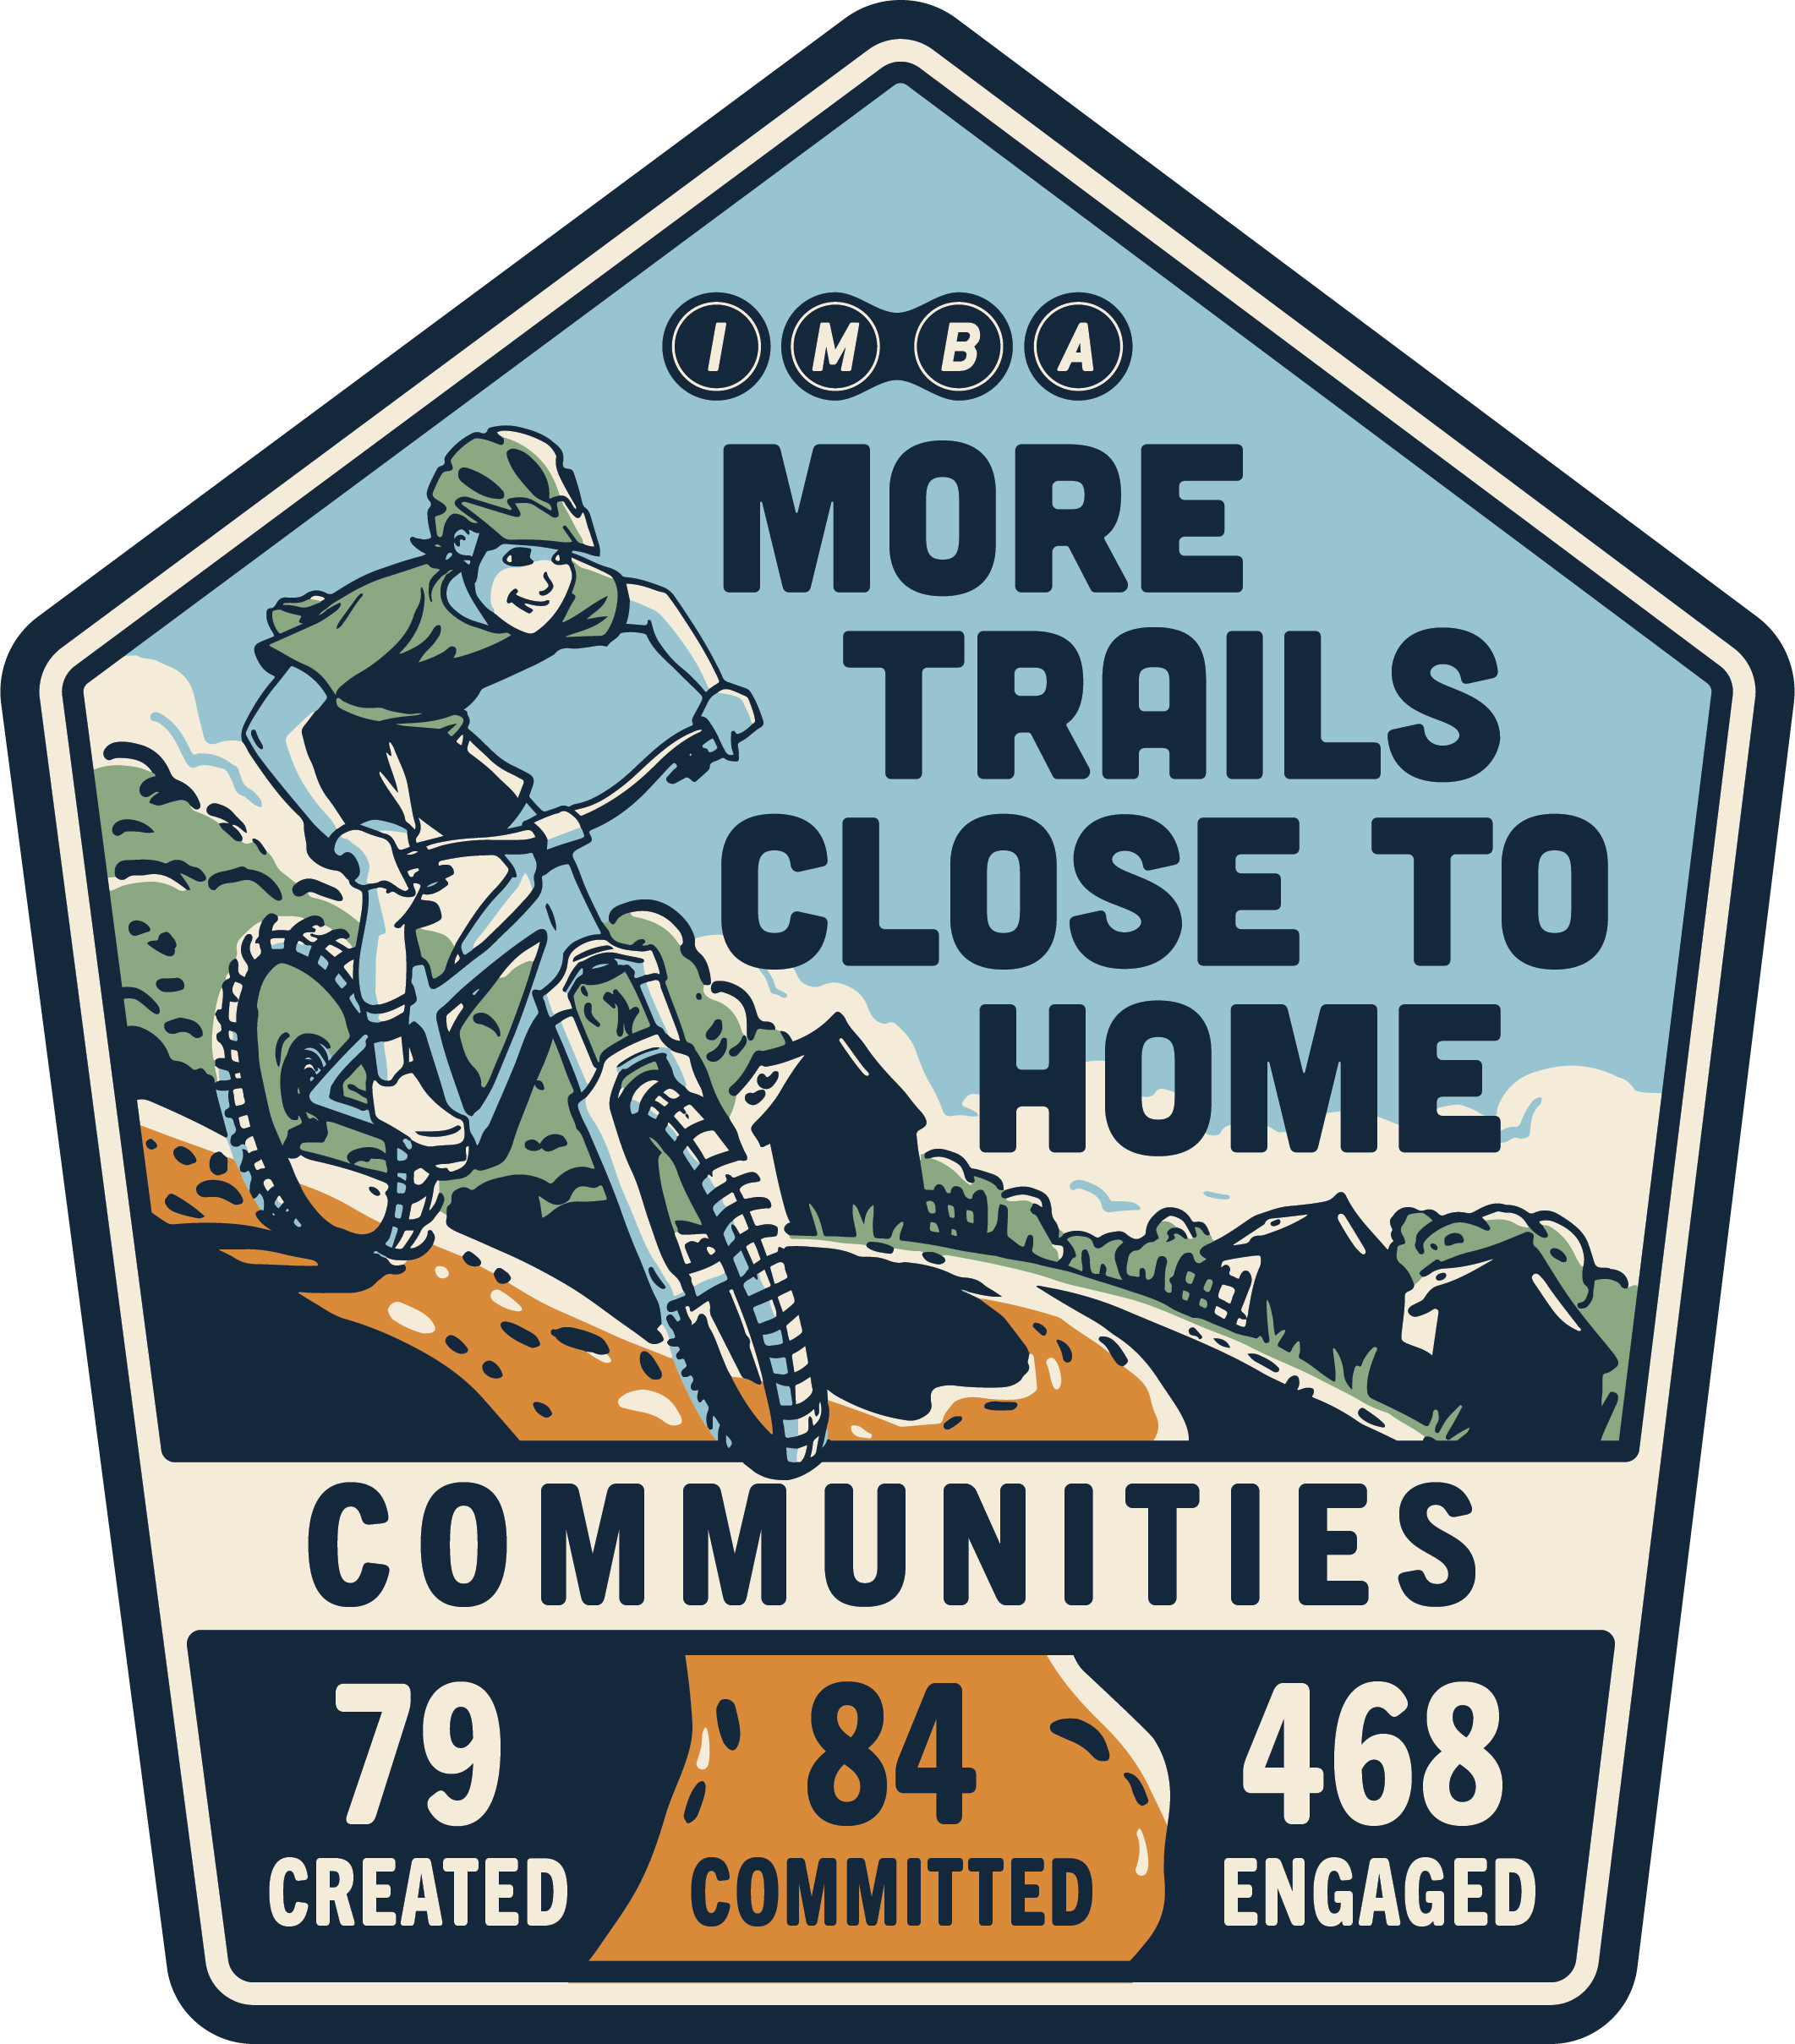 A badge for More Trails Close to Home shows the image of a mountain biker on a trail and notes 79 communities where trails have been created, 84 have committed, and 468 have engaged in the process.